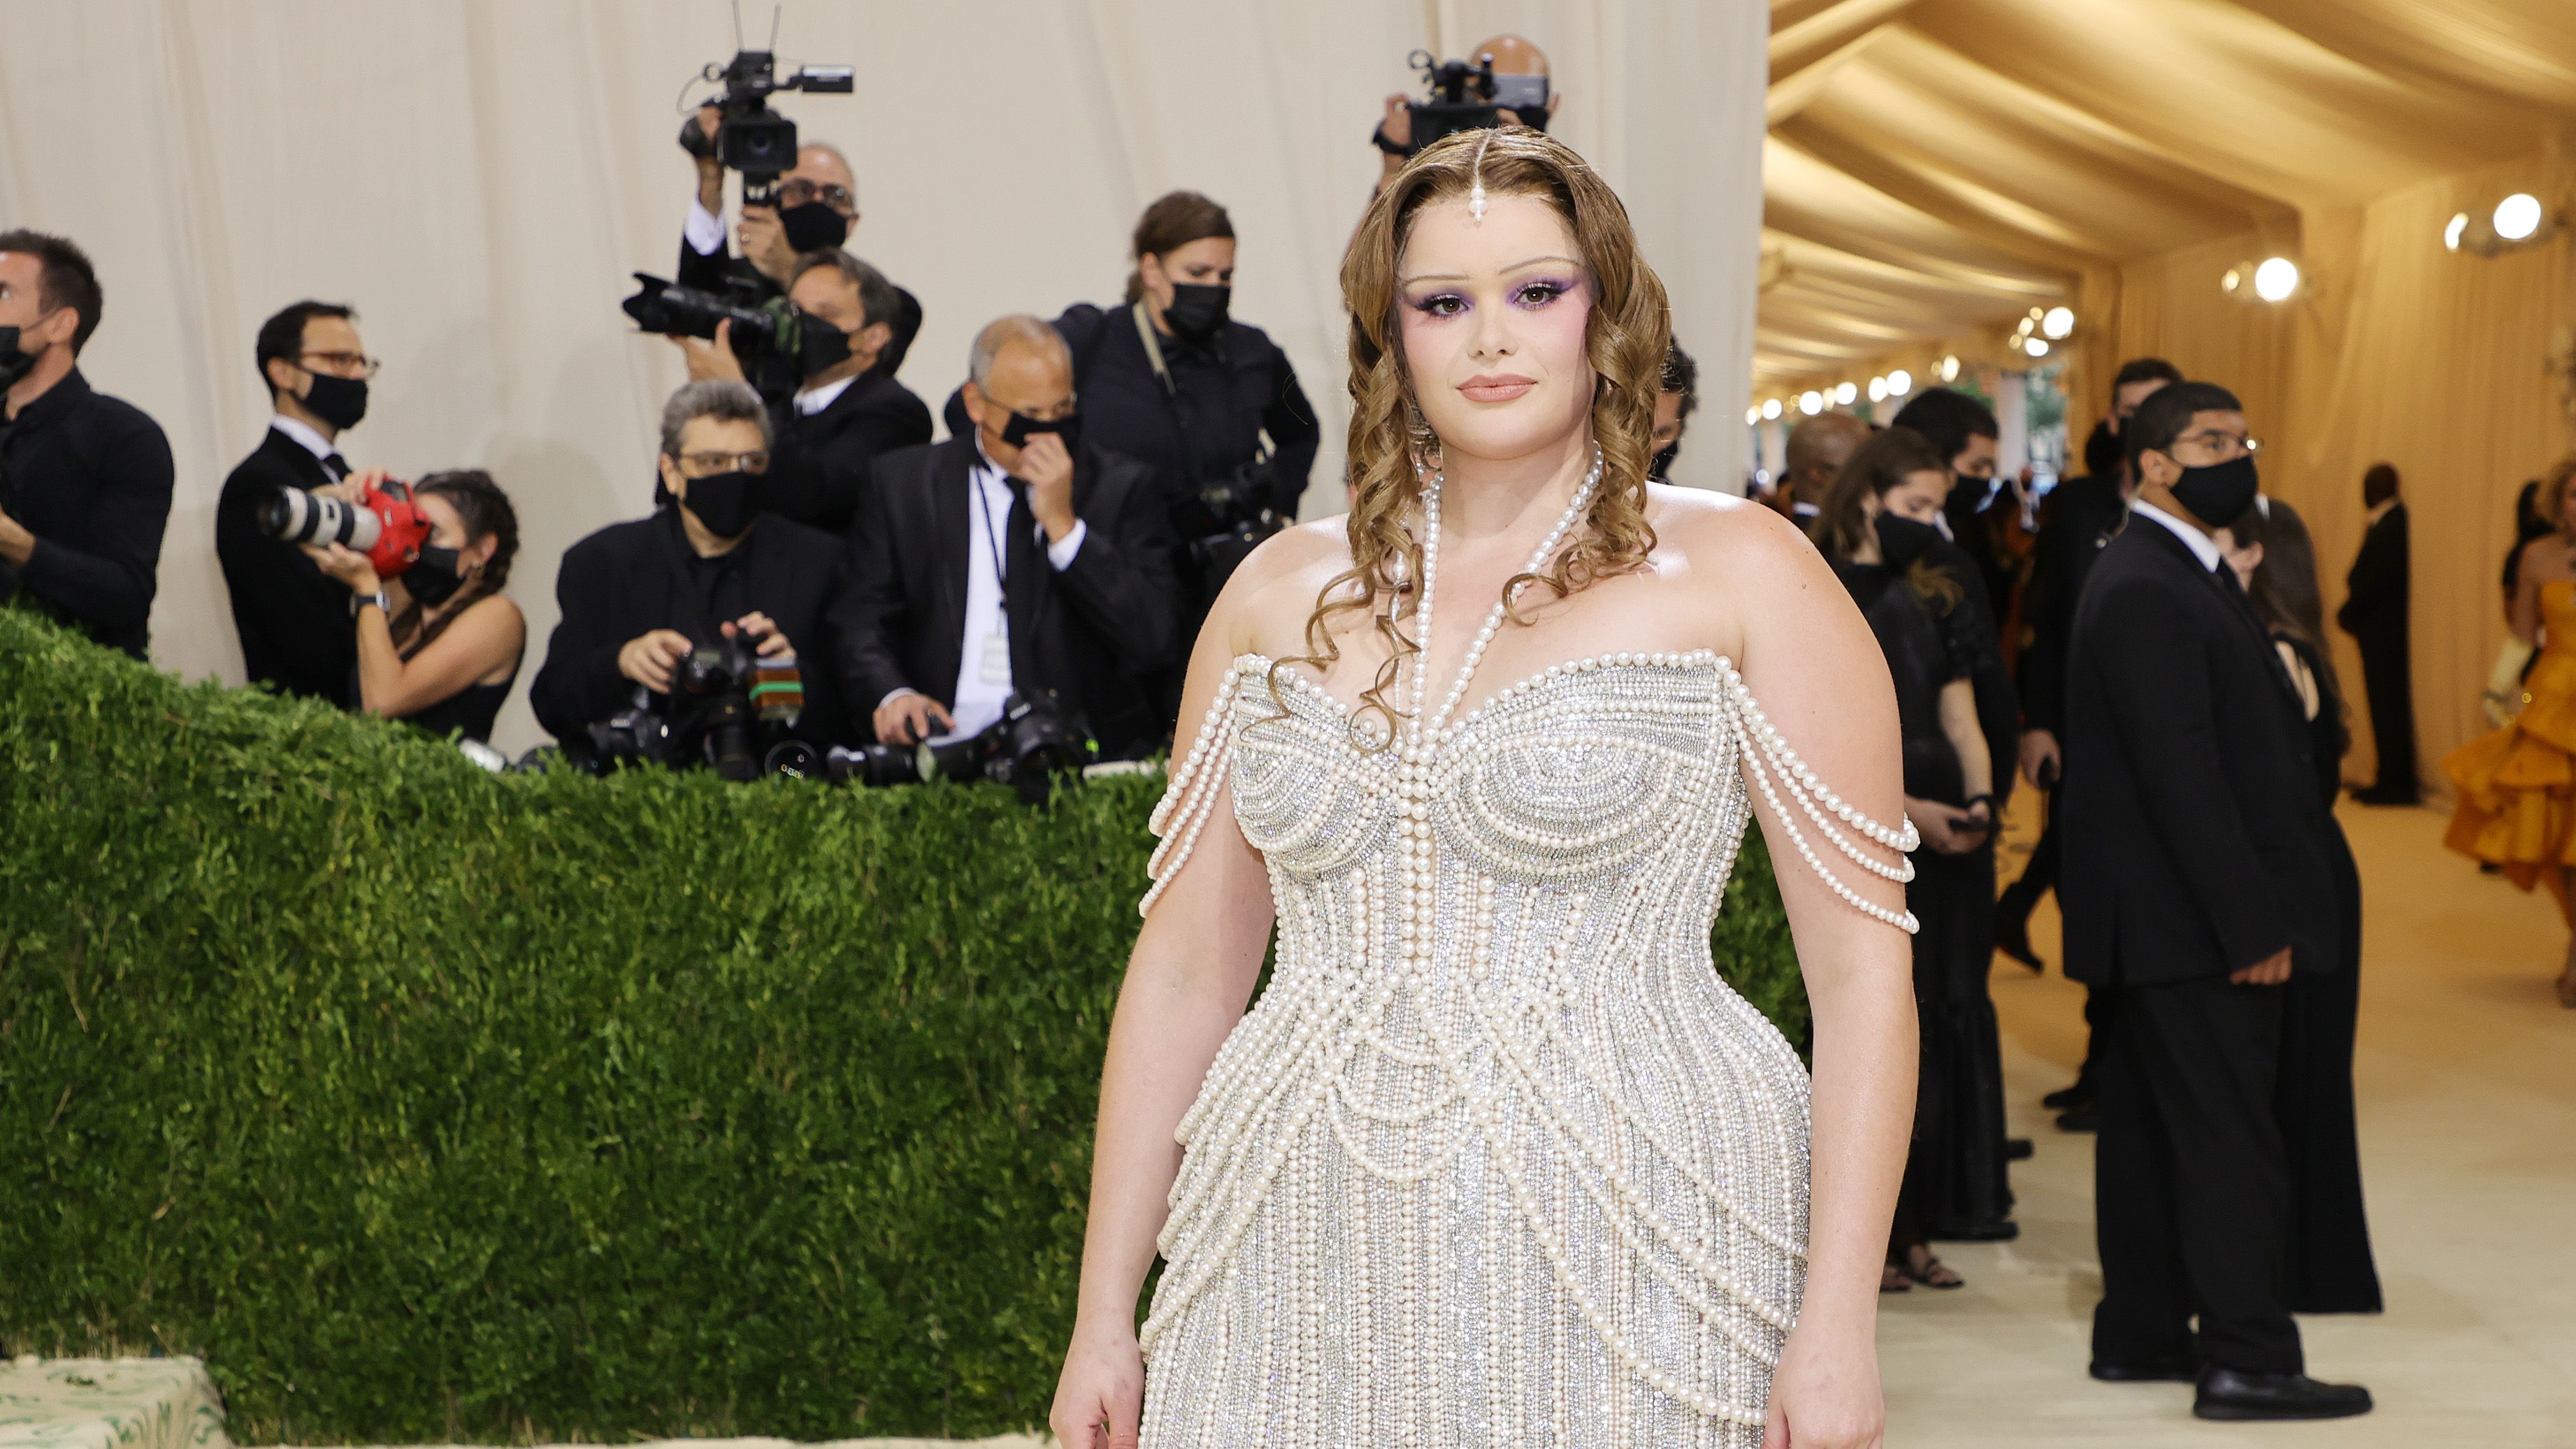 17 Women Over 50 Who Slayed The Met Gala Red Carpet